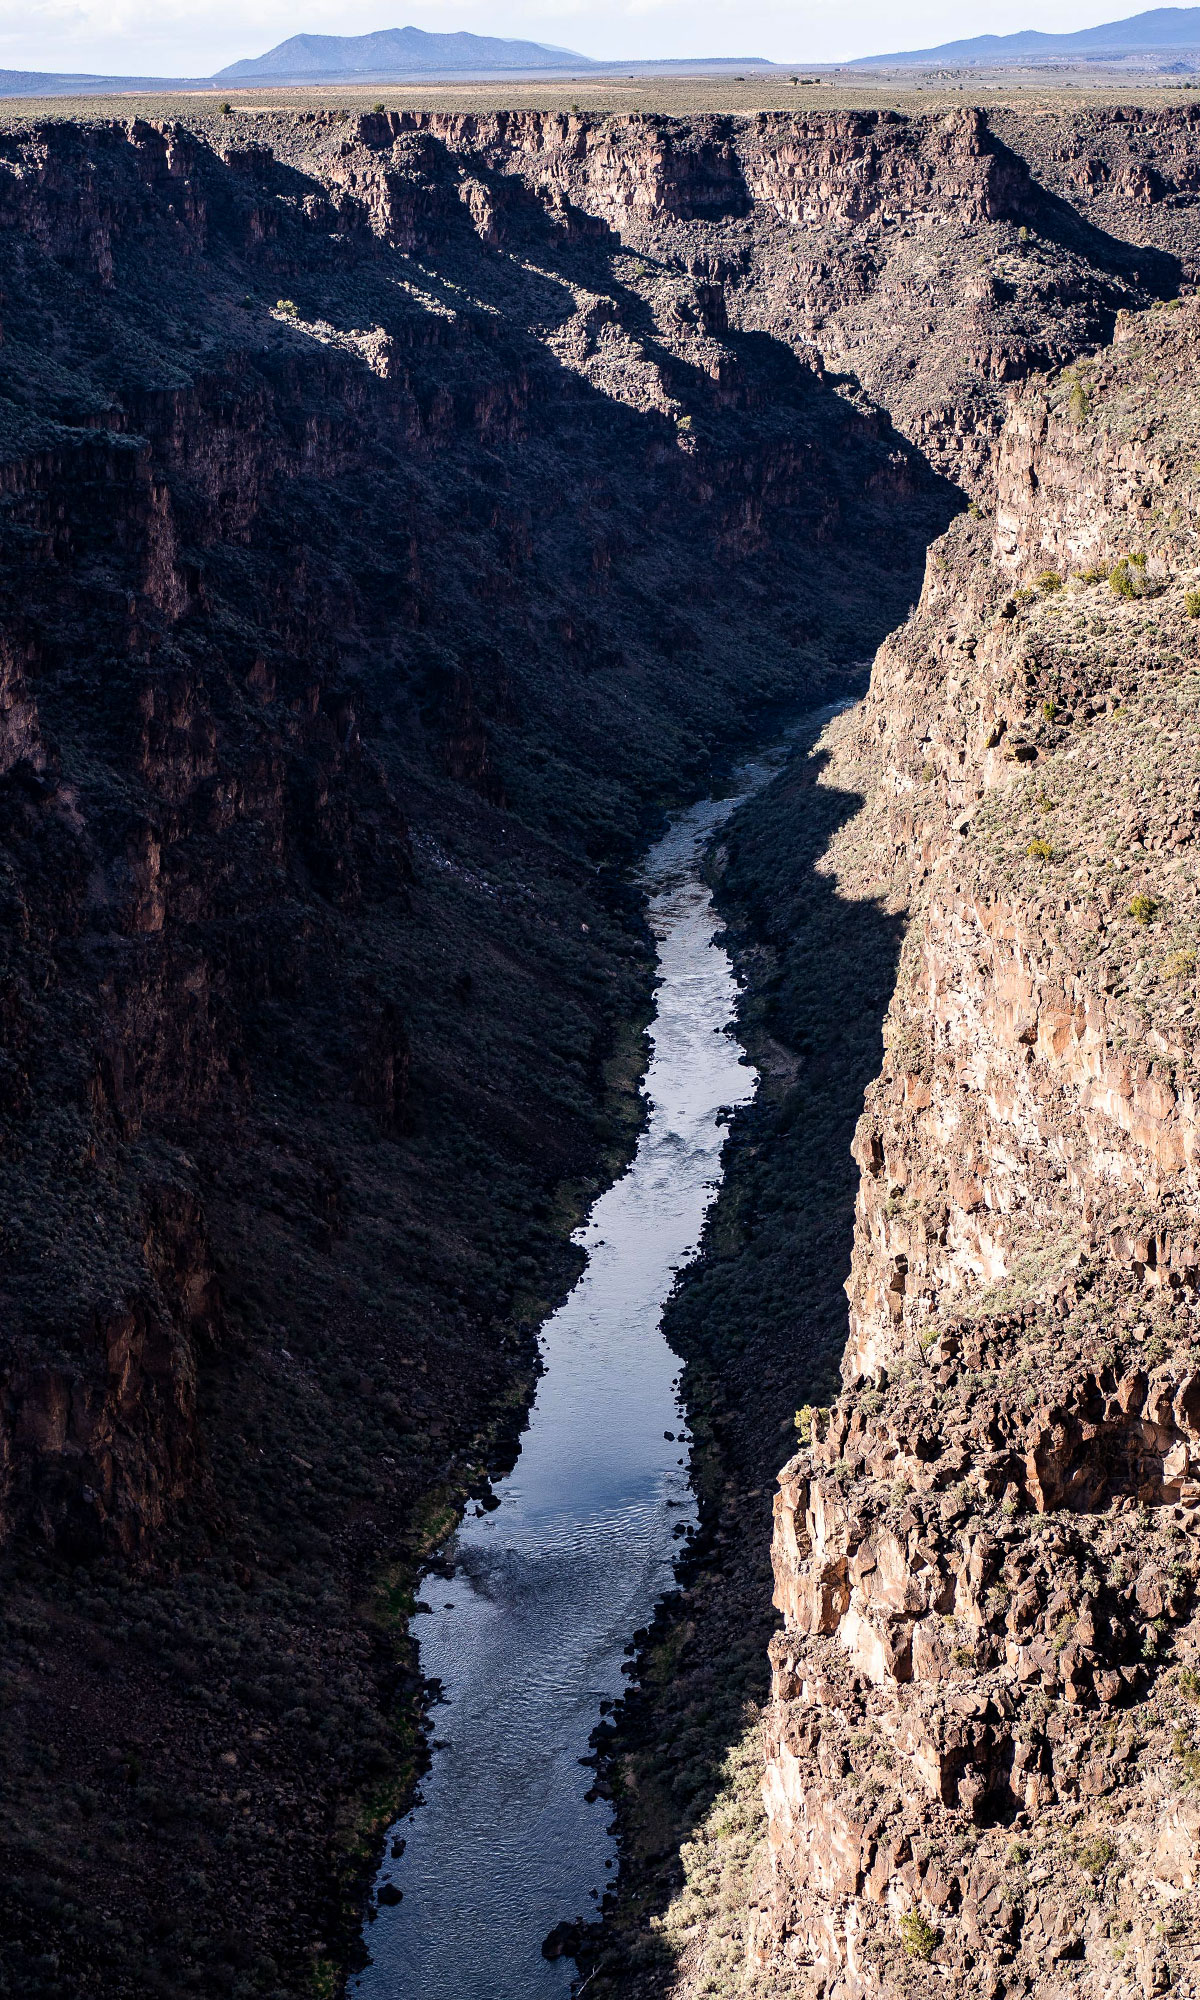 An aerial view of the Rio Grande Gorge.